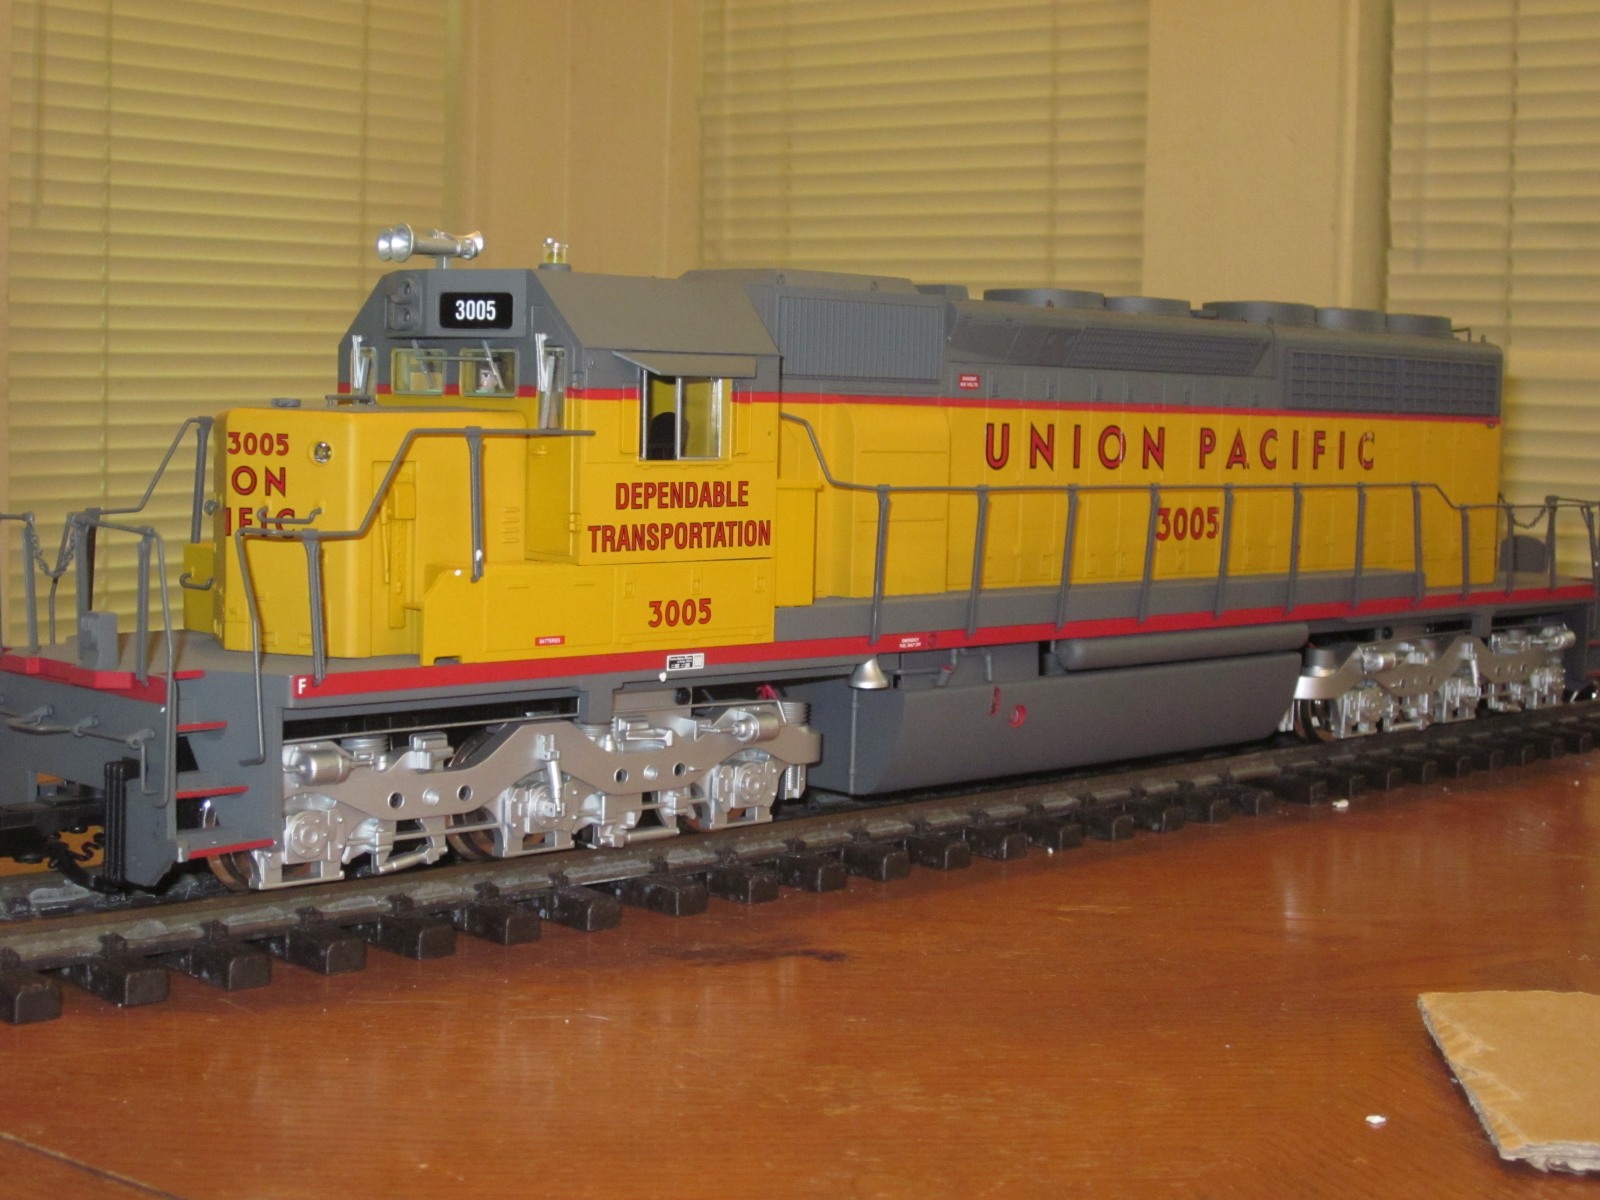 R22302 Union Pacific UP 3005